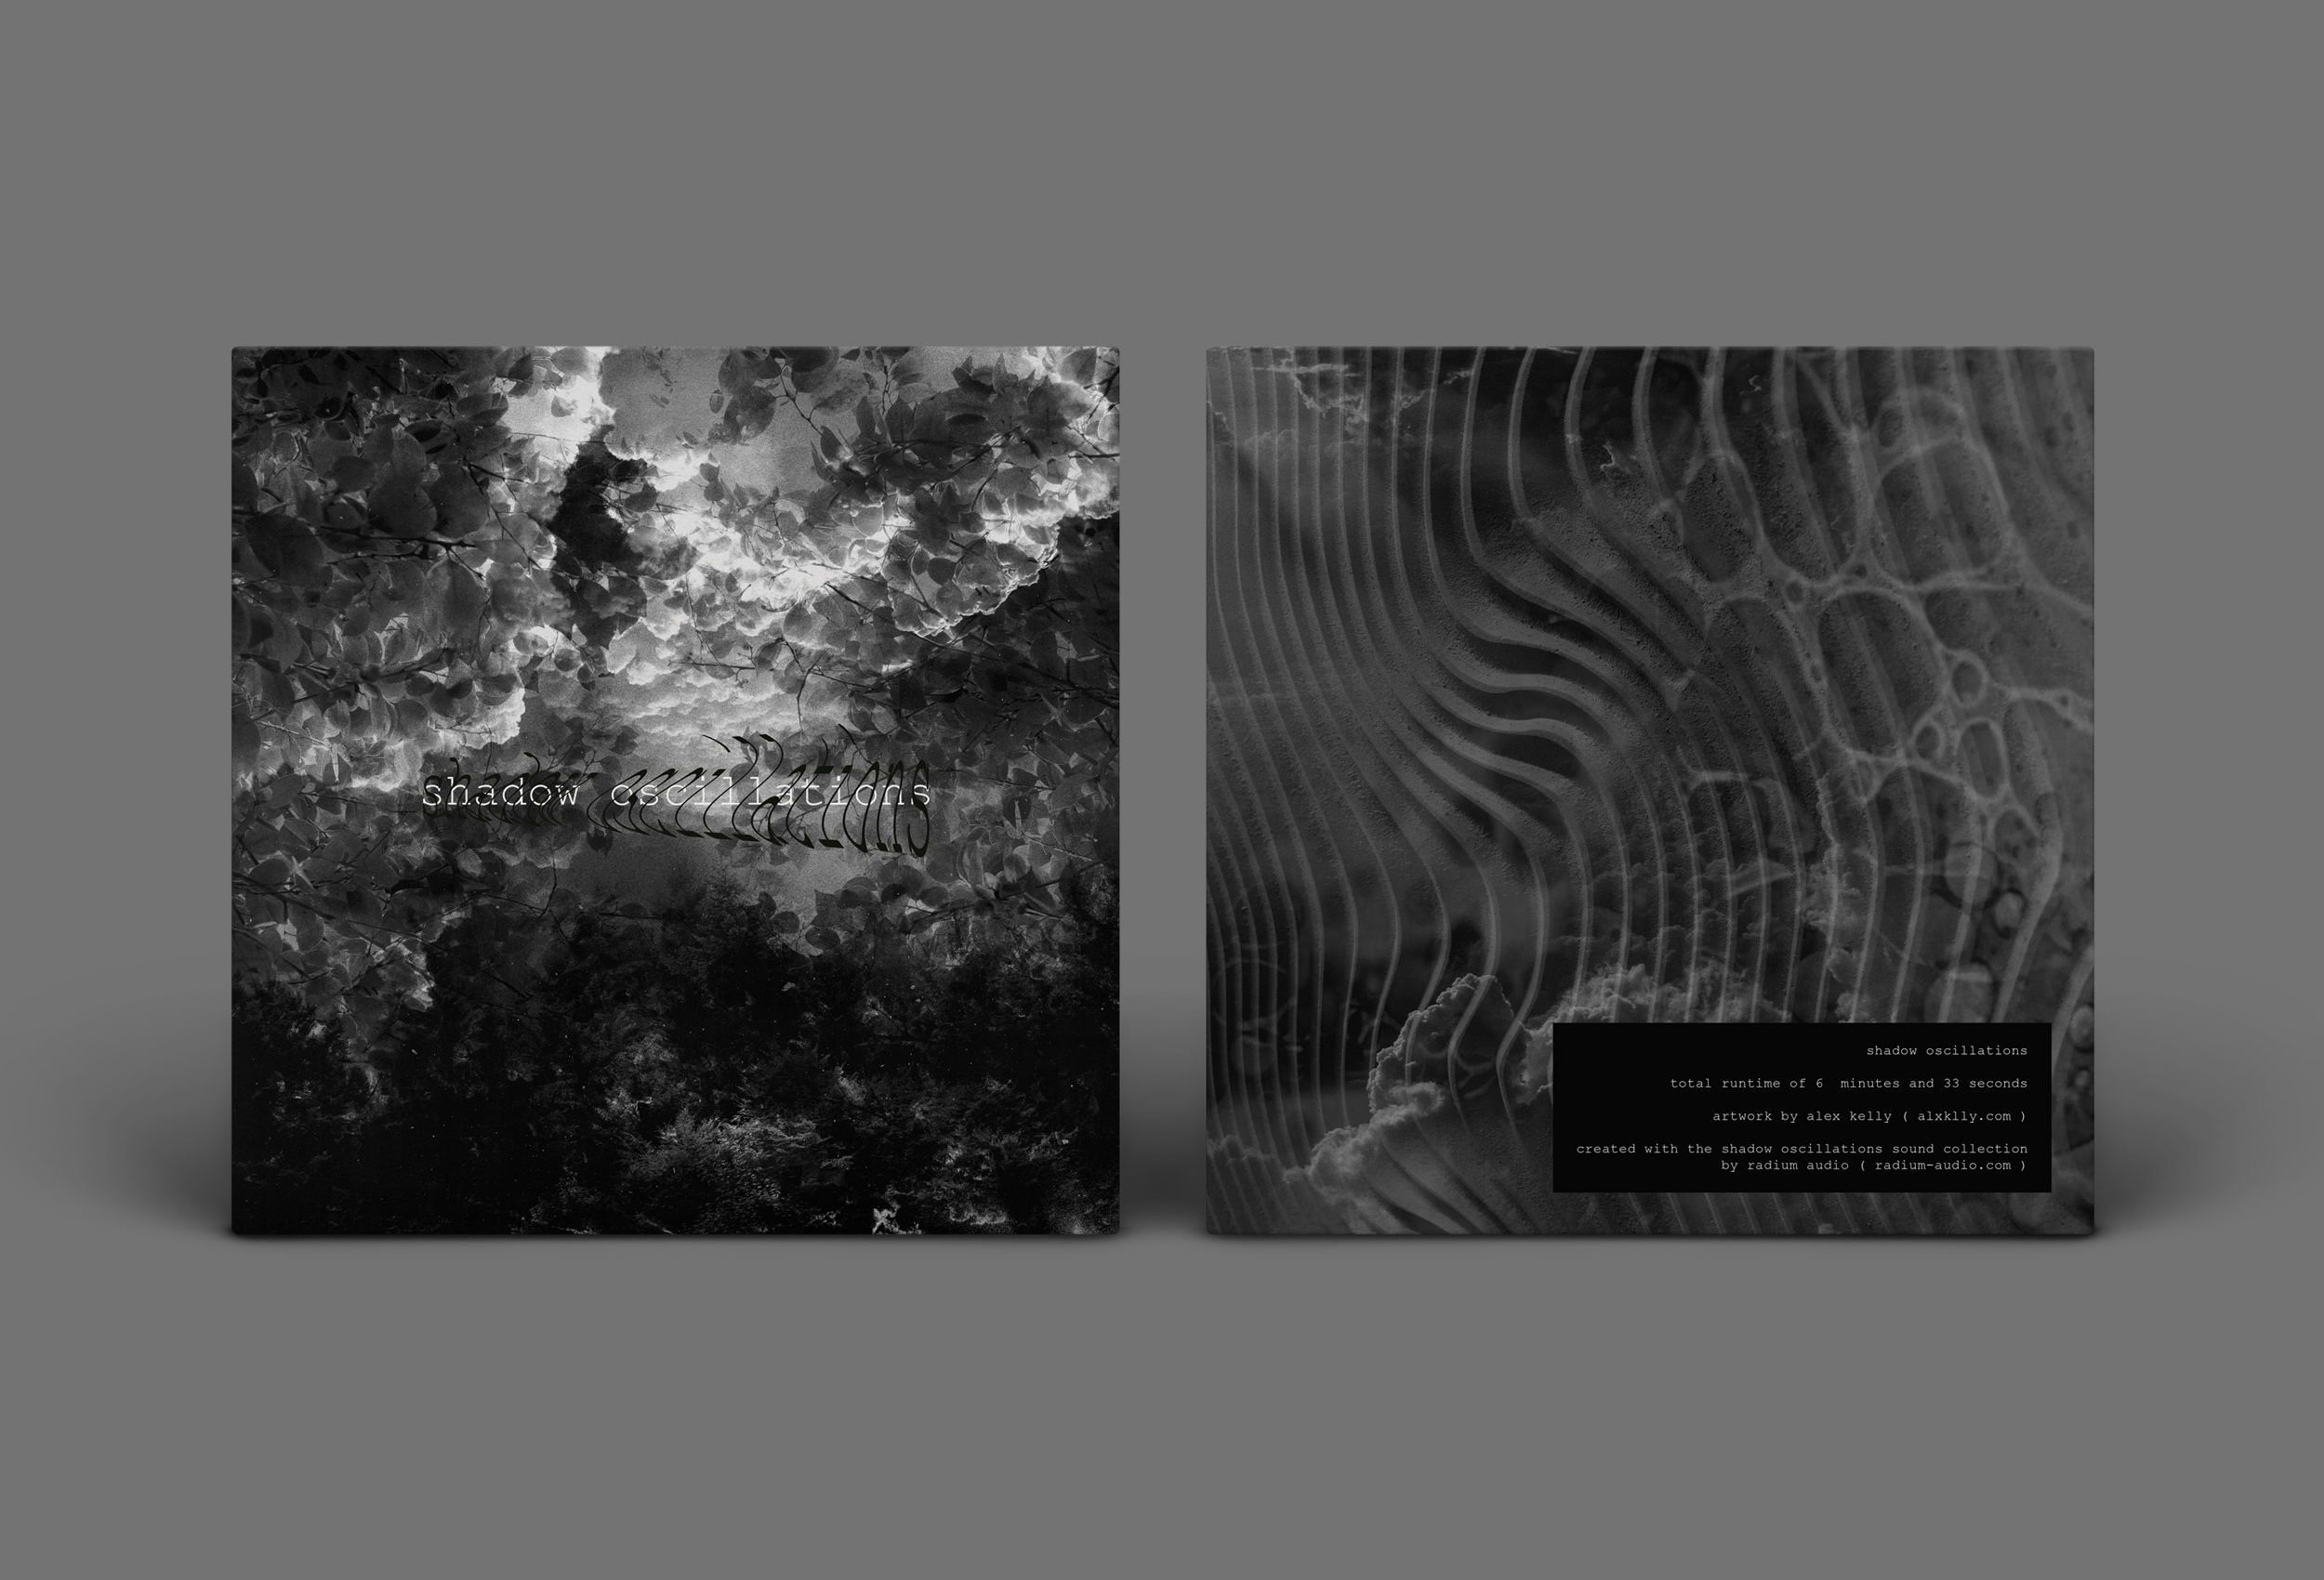 Woetown - Shadow Oscillations cover artwork and vinyl packaging design.